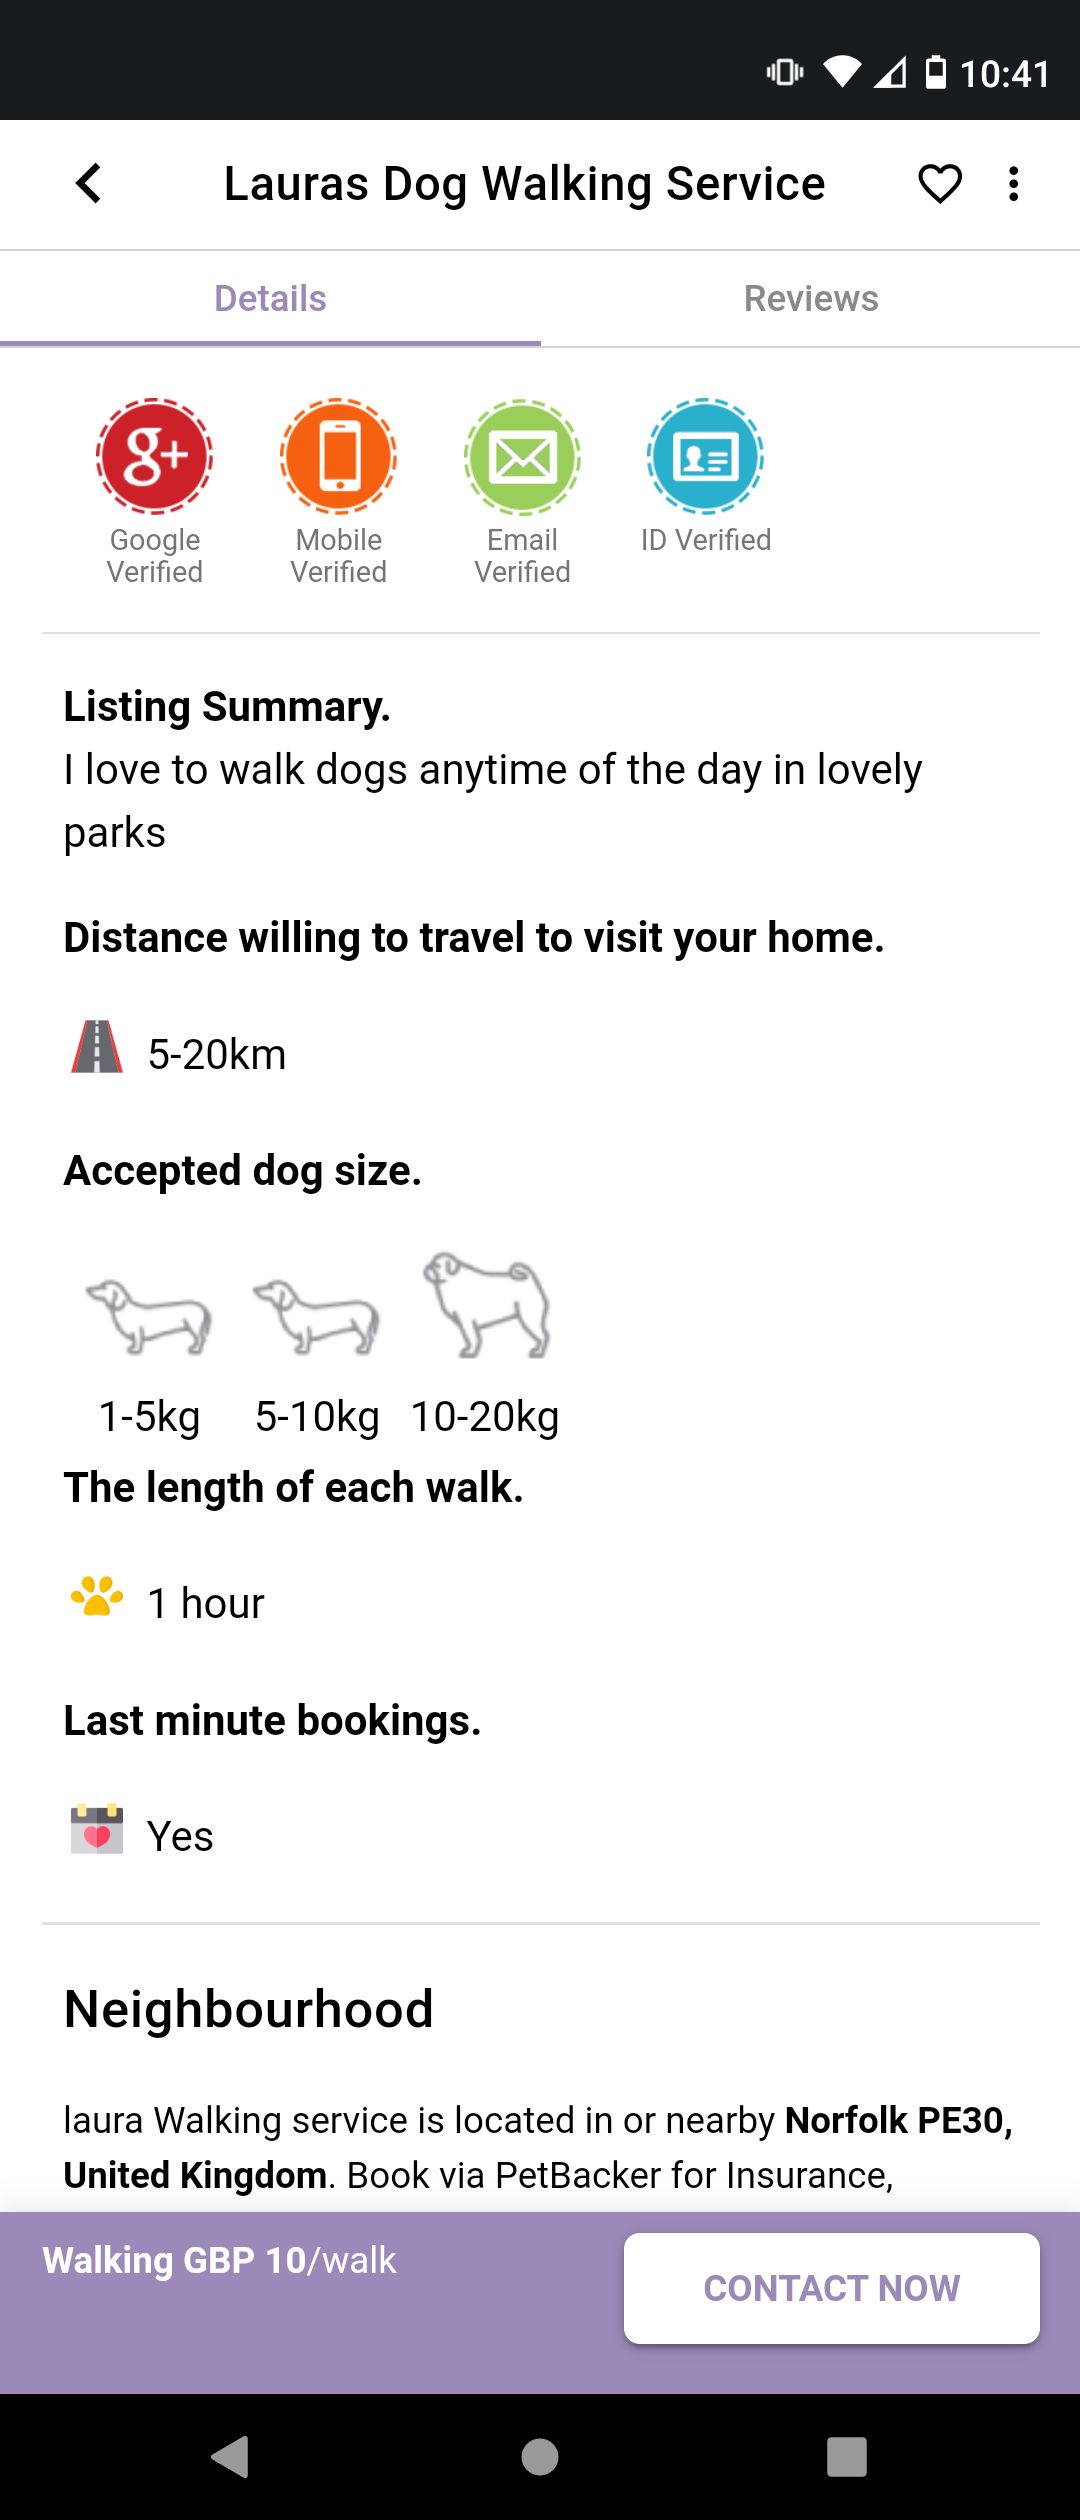 Dog Walking Service Profile on PetBacker Android App